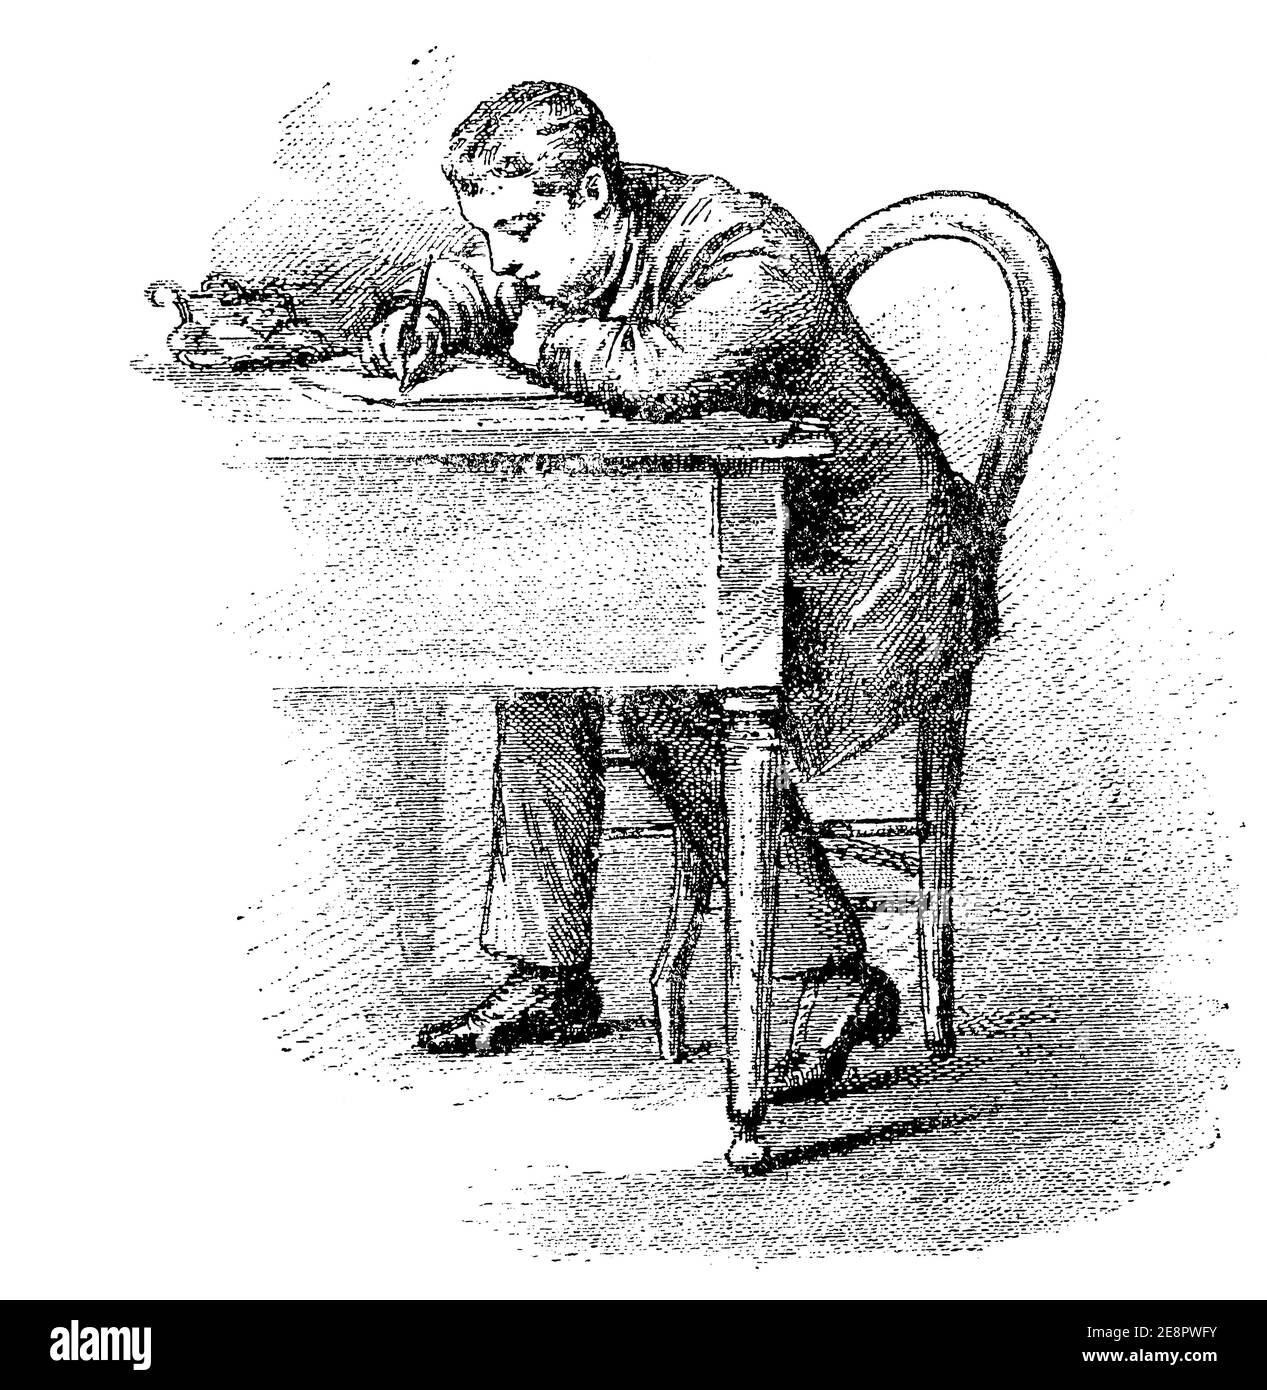 The desk is too high. Poor posture. Illustration of the 19th century. Germany. White background. Stock Photo